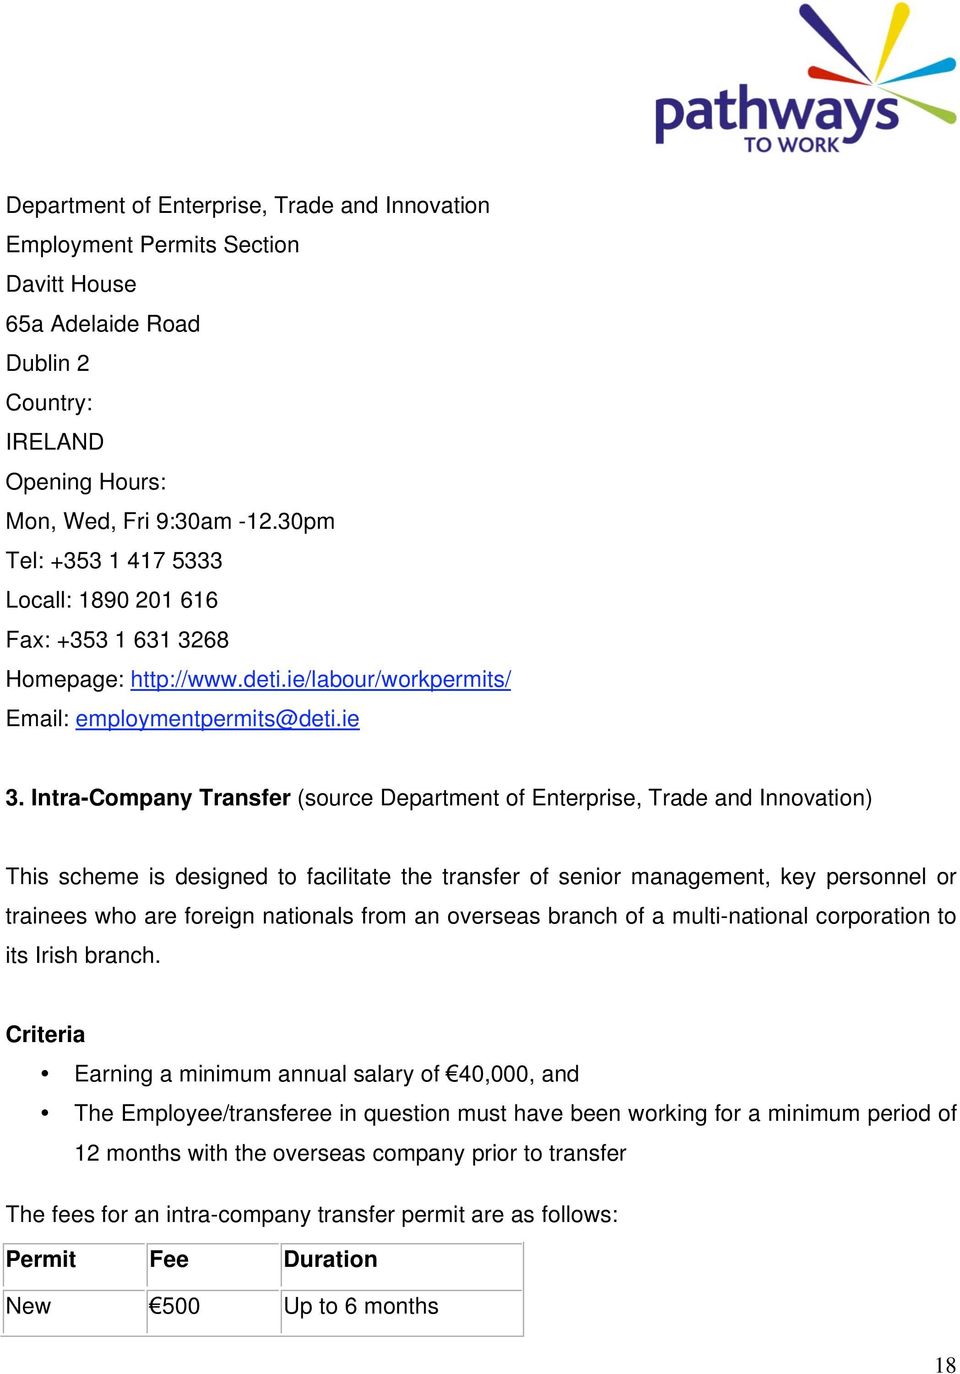 Intra-Company Transfer (source Department of Enterprise, Trade and Innovation) This scheme is designed to facilitate the transfer of senior management, key personnel or trainees who are foreign